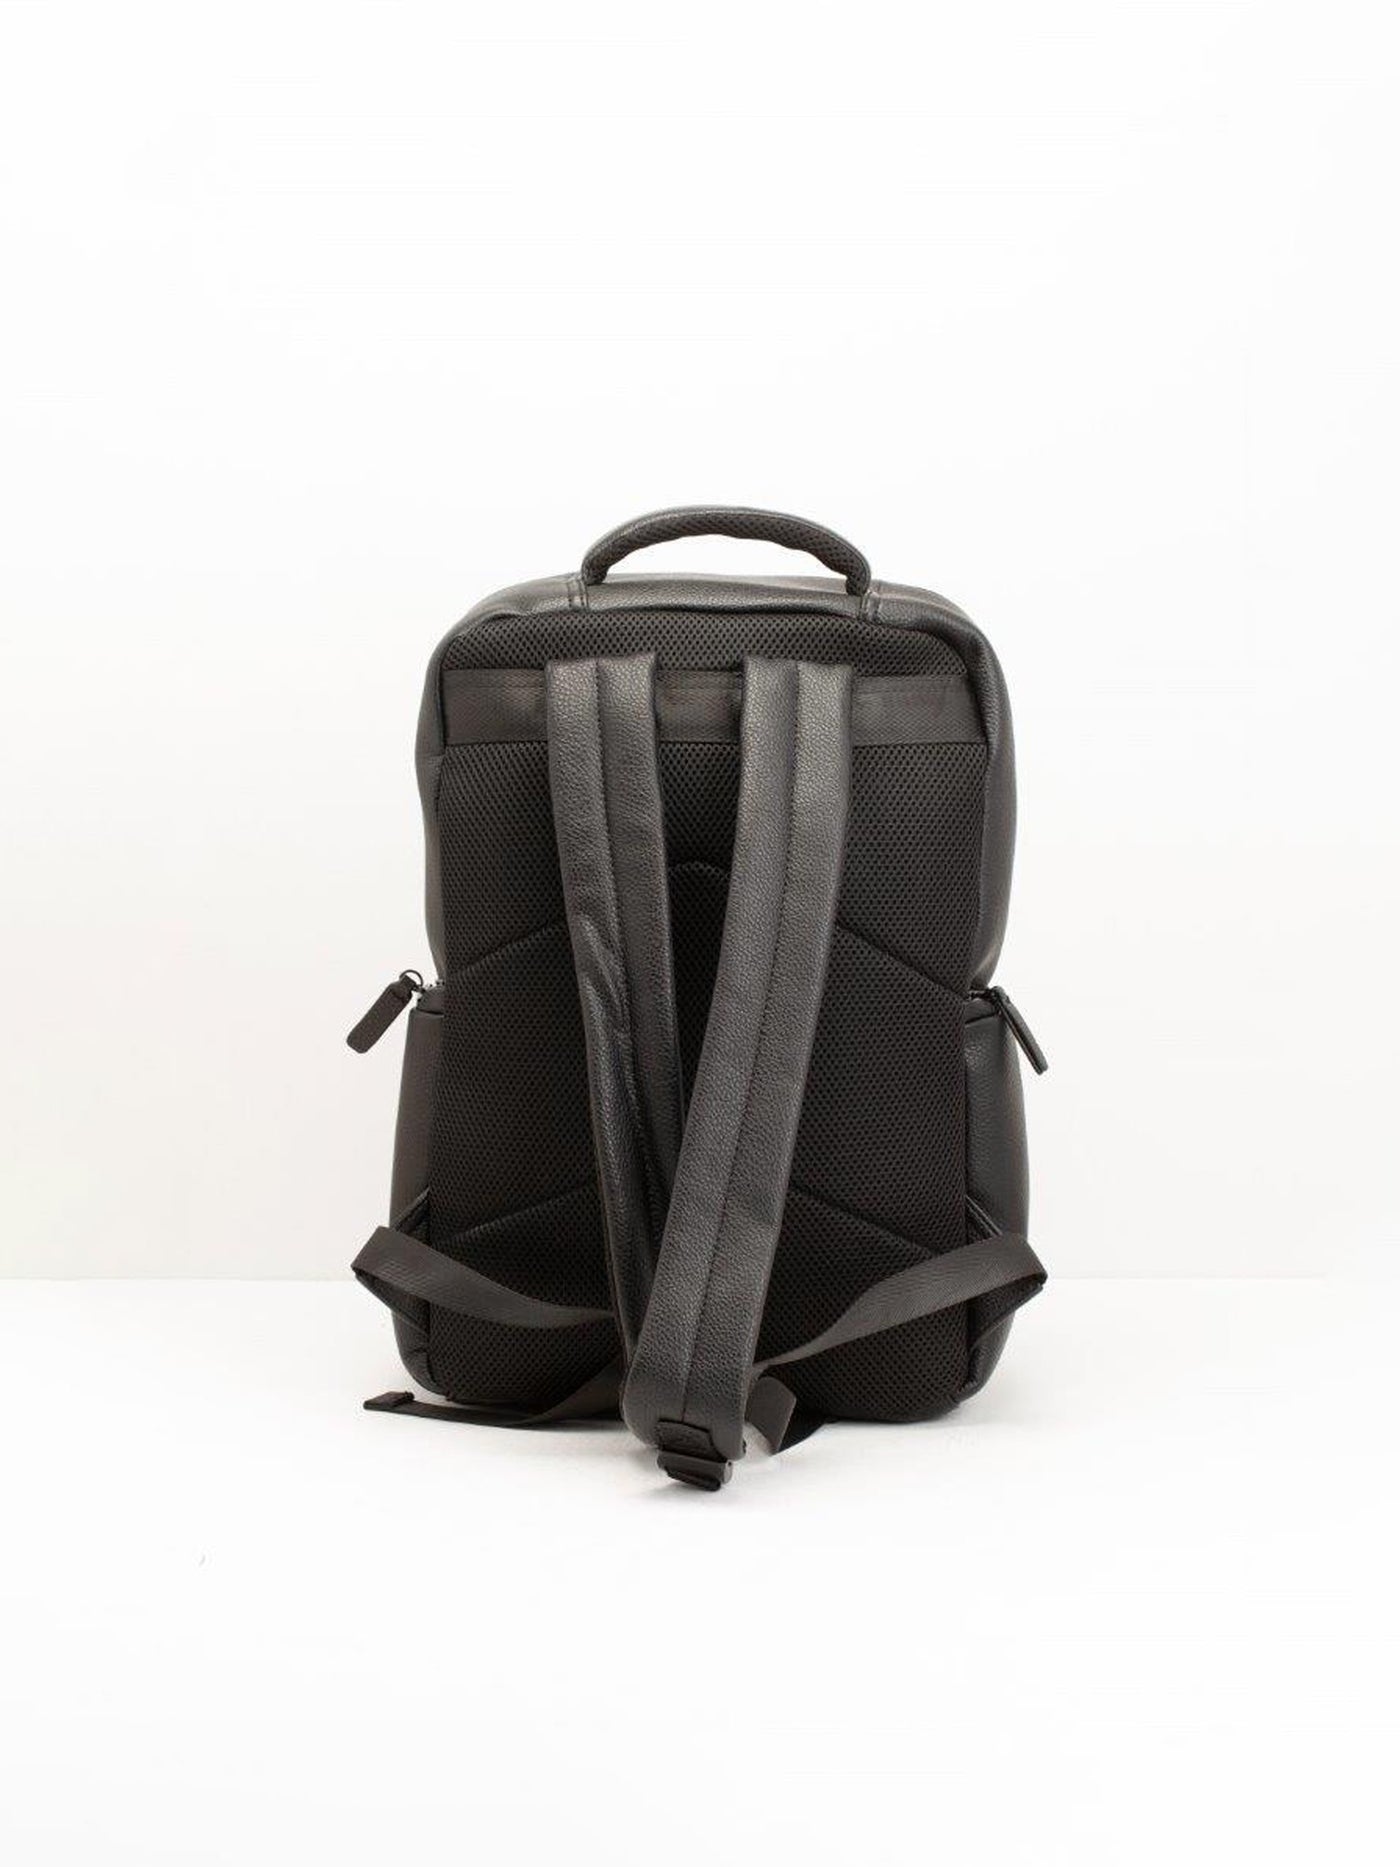 Dare Mens PU Leather Backpack